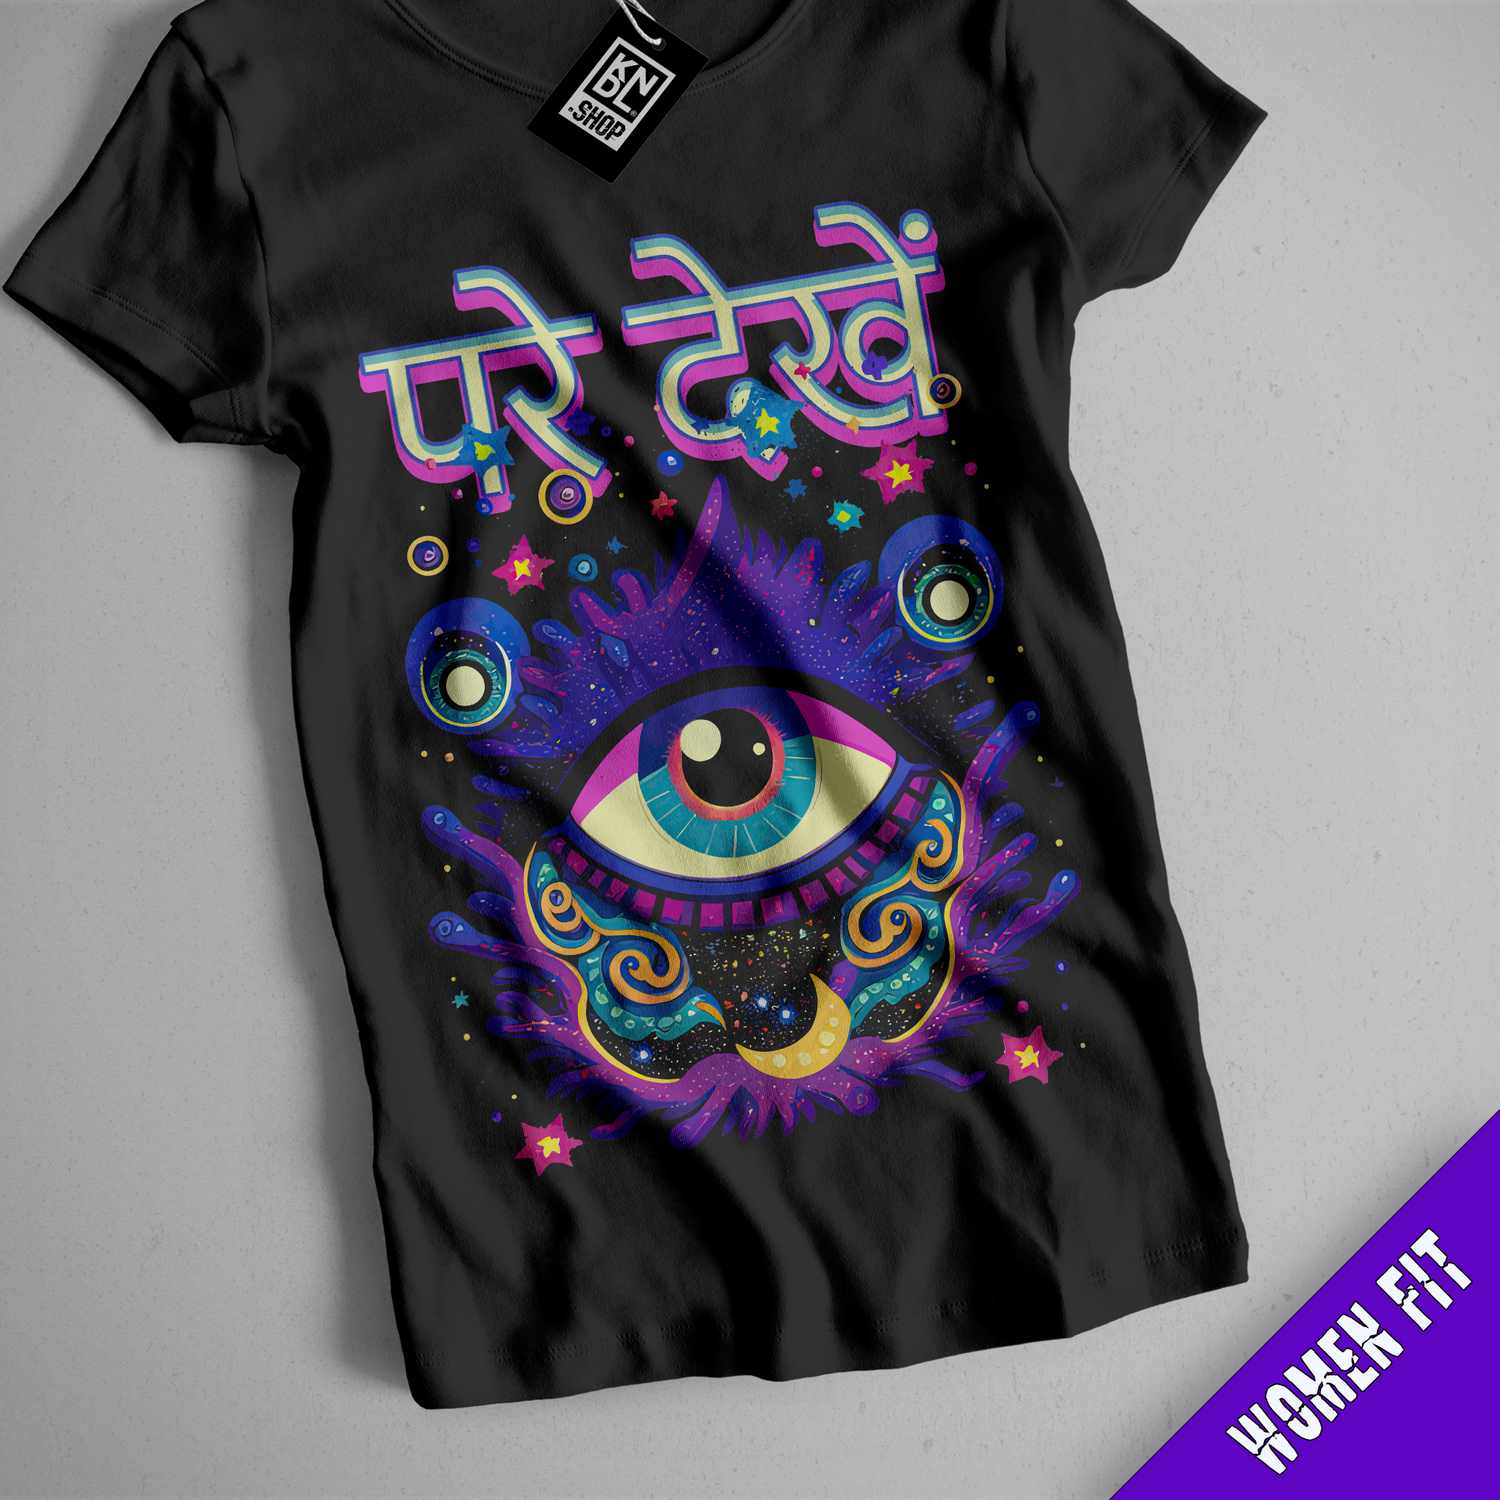 a t - shirt with a psychedelic eye on it